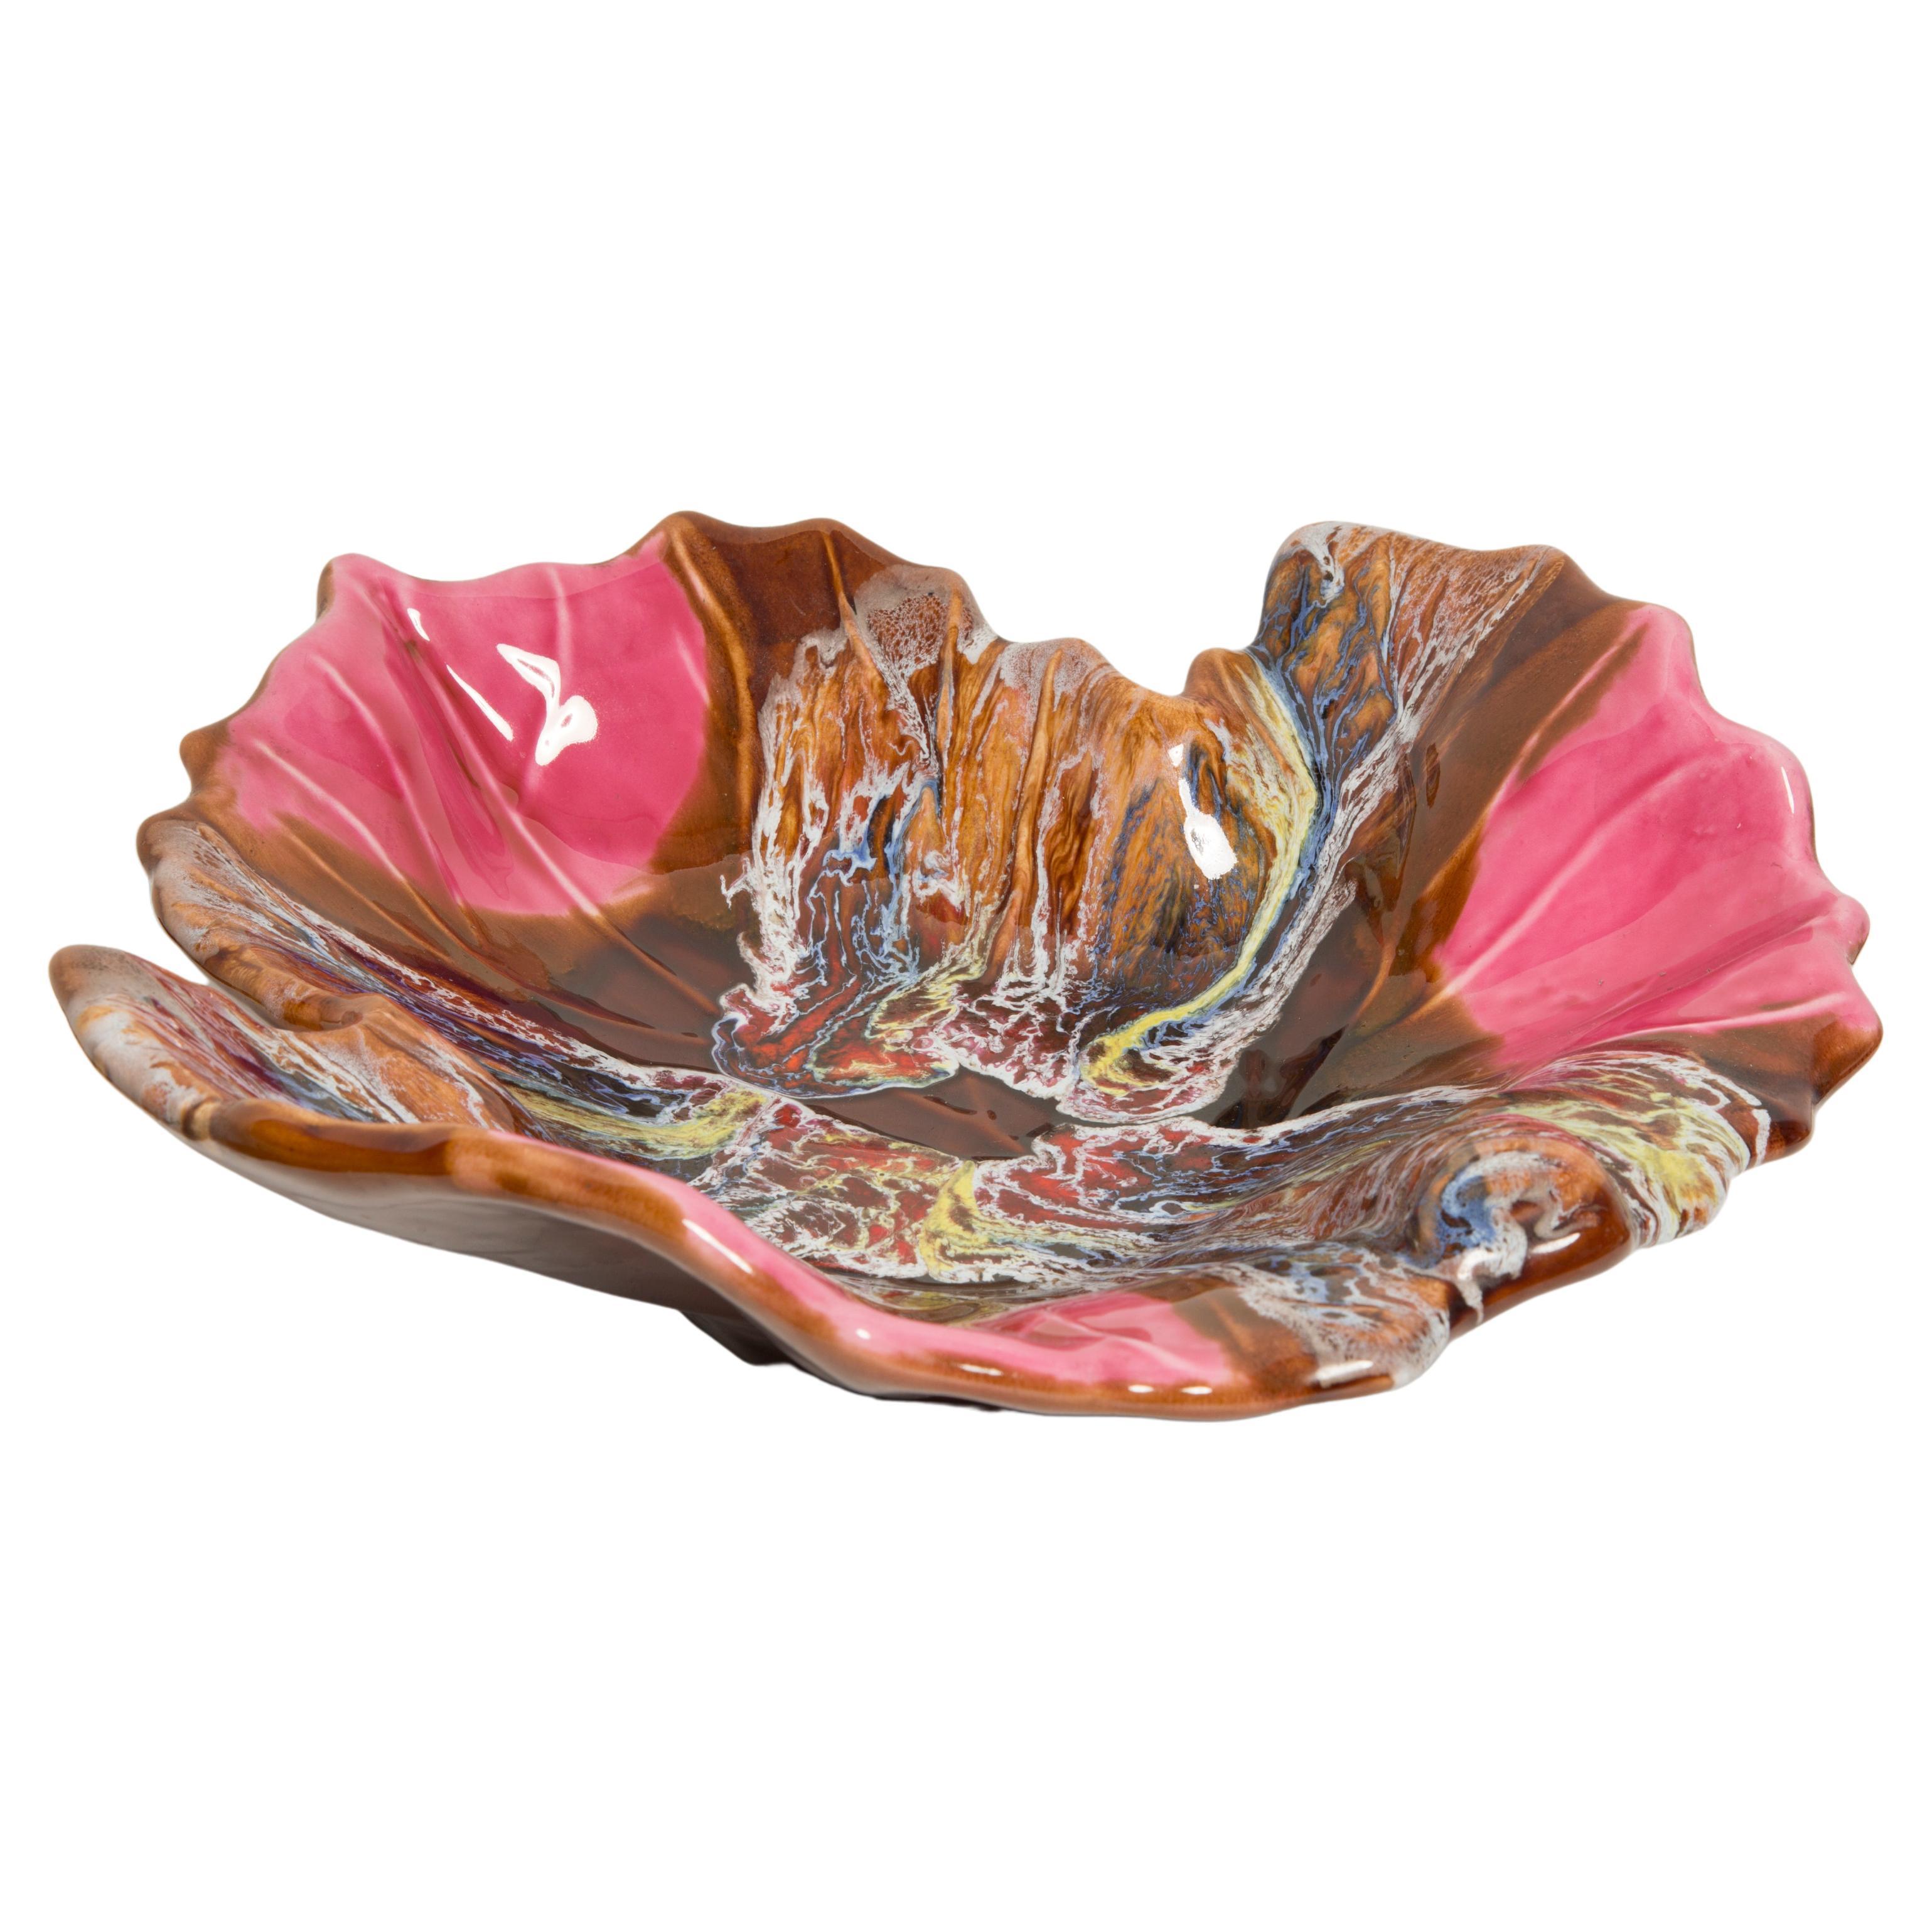 Vintage Pink and Brown Decorative Glass Leaf Plate, Italy, 1960s For Sale